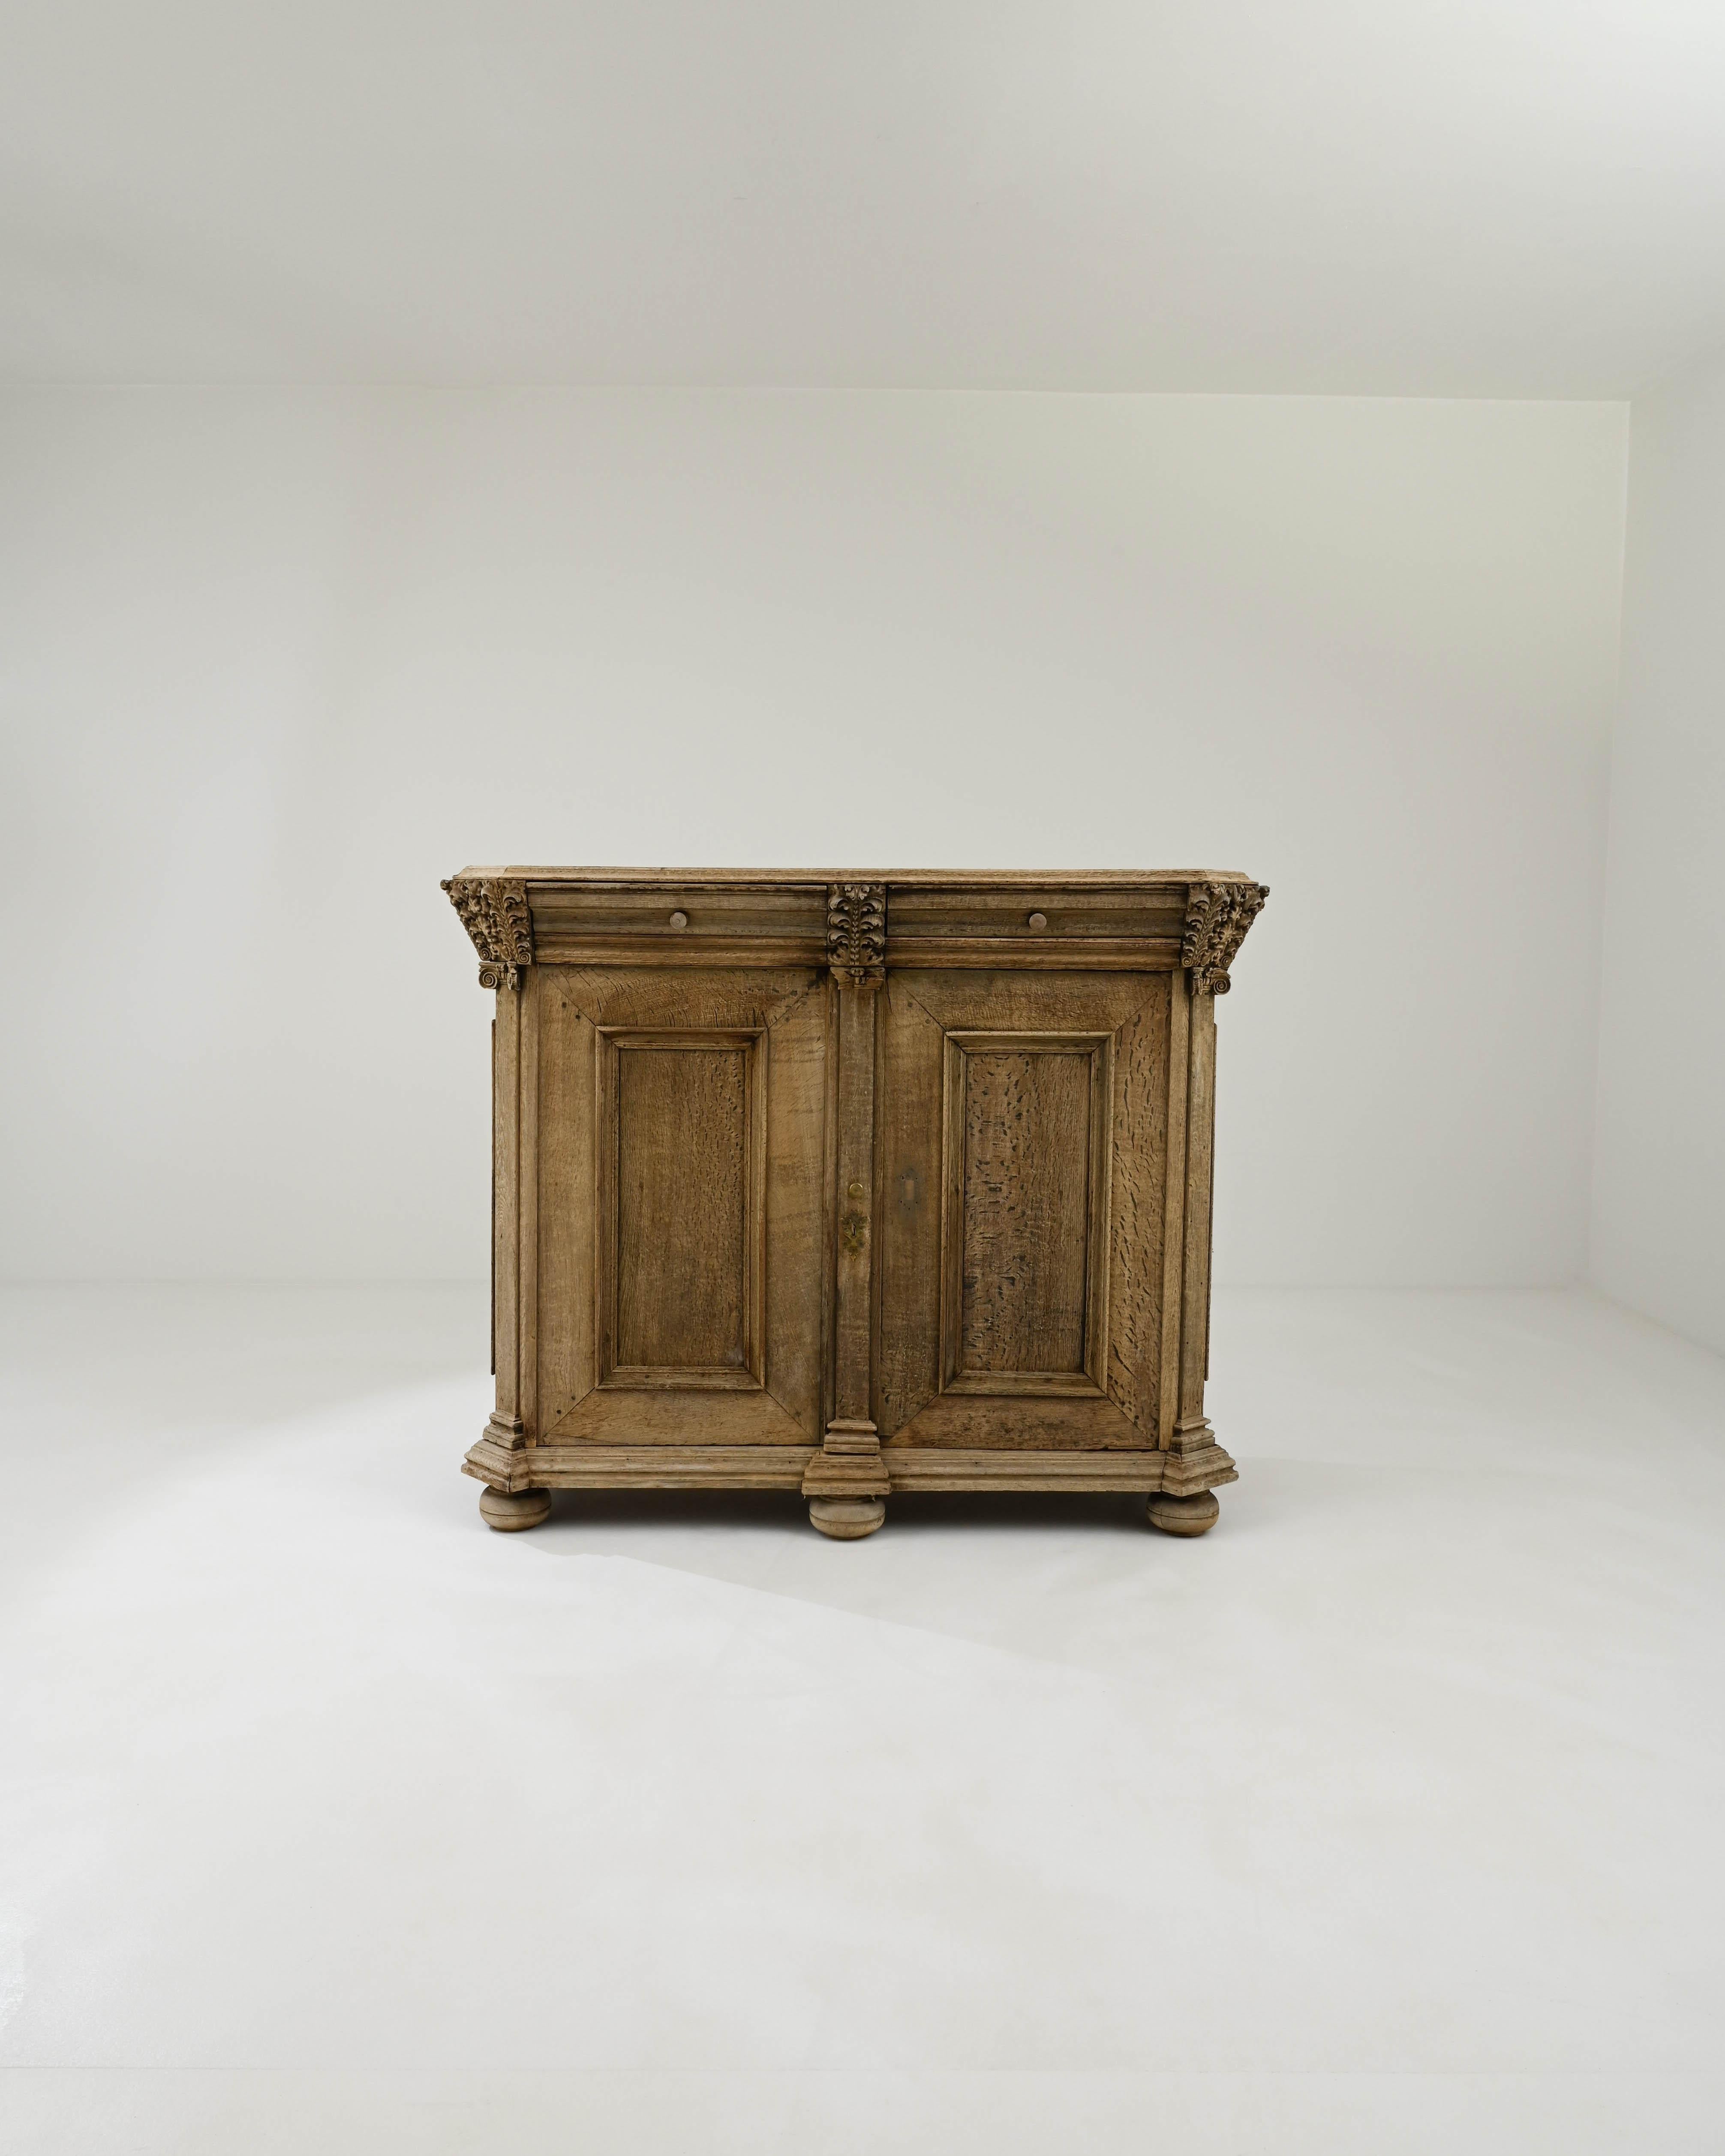 A wooden buffet created in France circa 1820. Stout and sturdily constructed, this expansive wooden buffet displays a confident design and classic 1800s French artisanry. Paneled doors, rotund and lathed feet, and fastidiously carved floral motifs